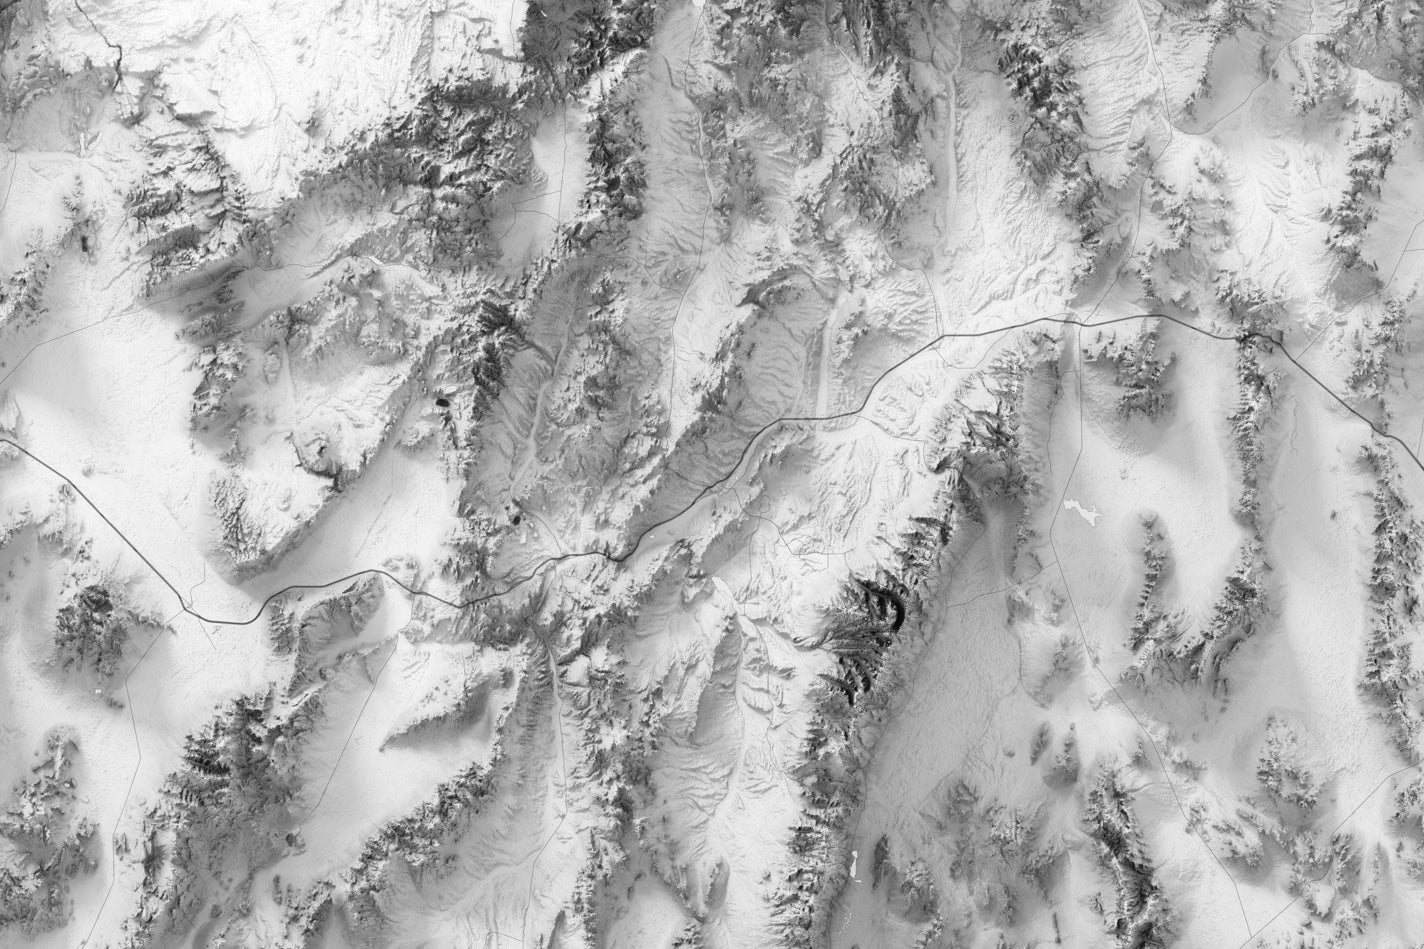 Nevada Humboldt Plains shaded relief